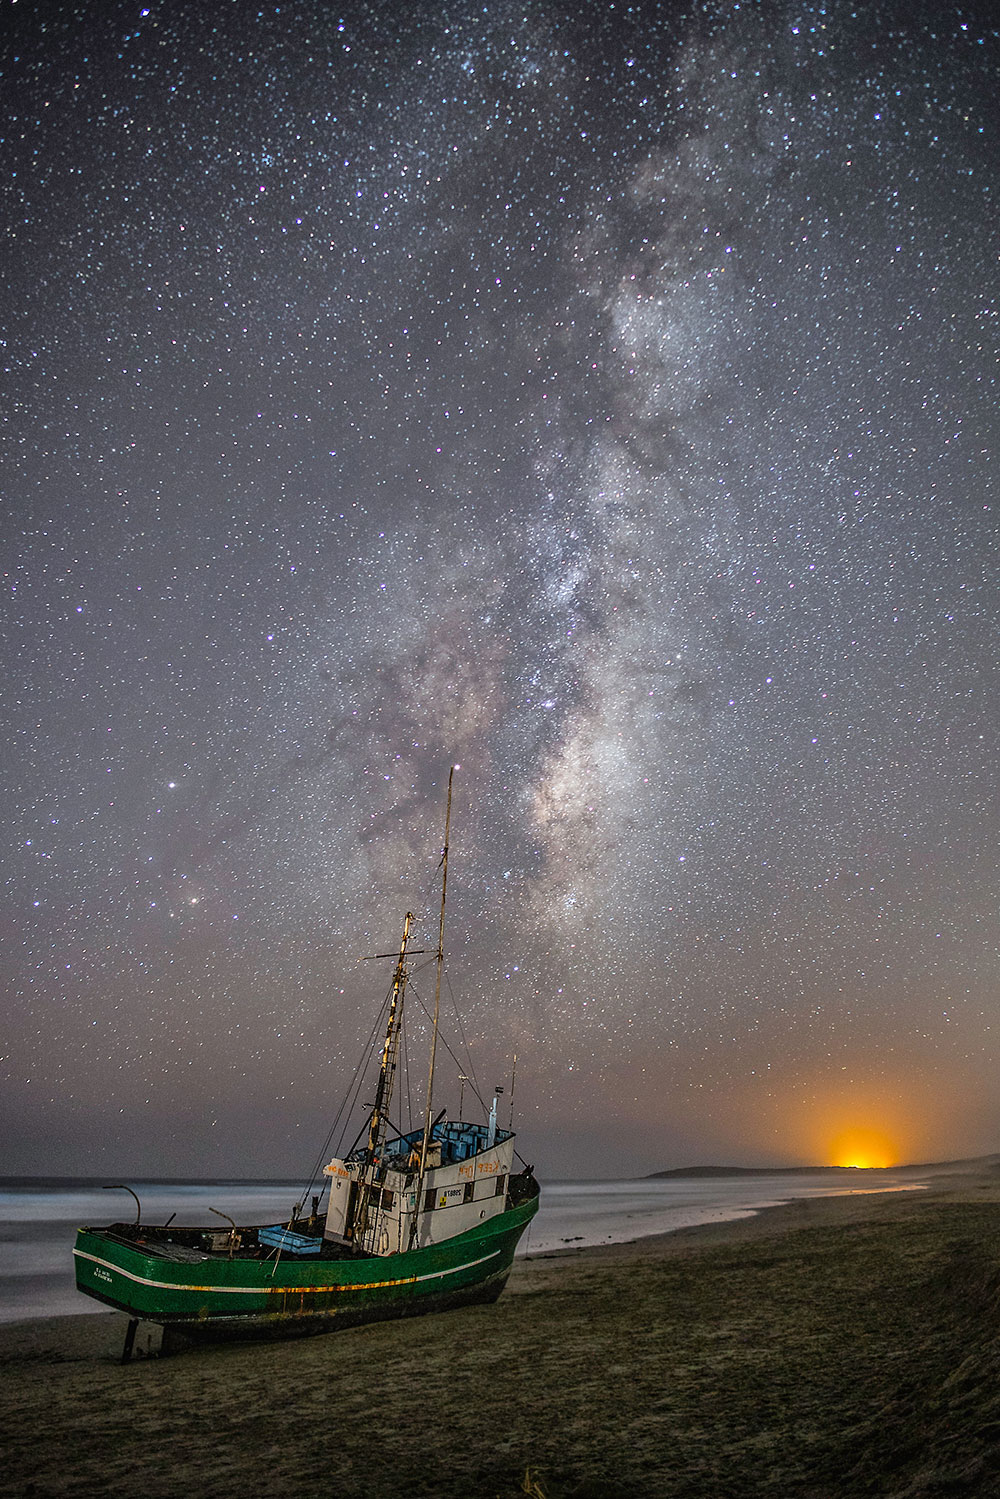 astrophotography_boat